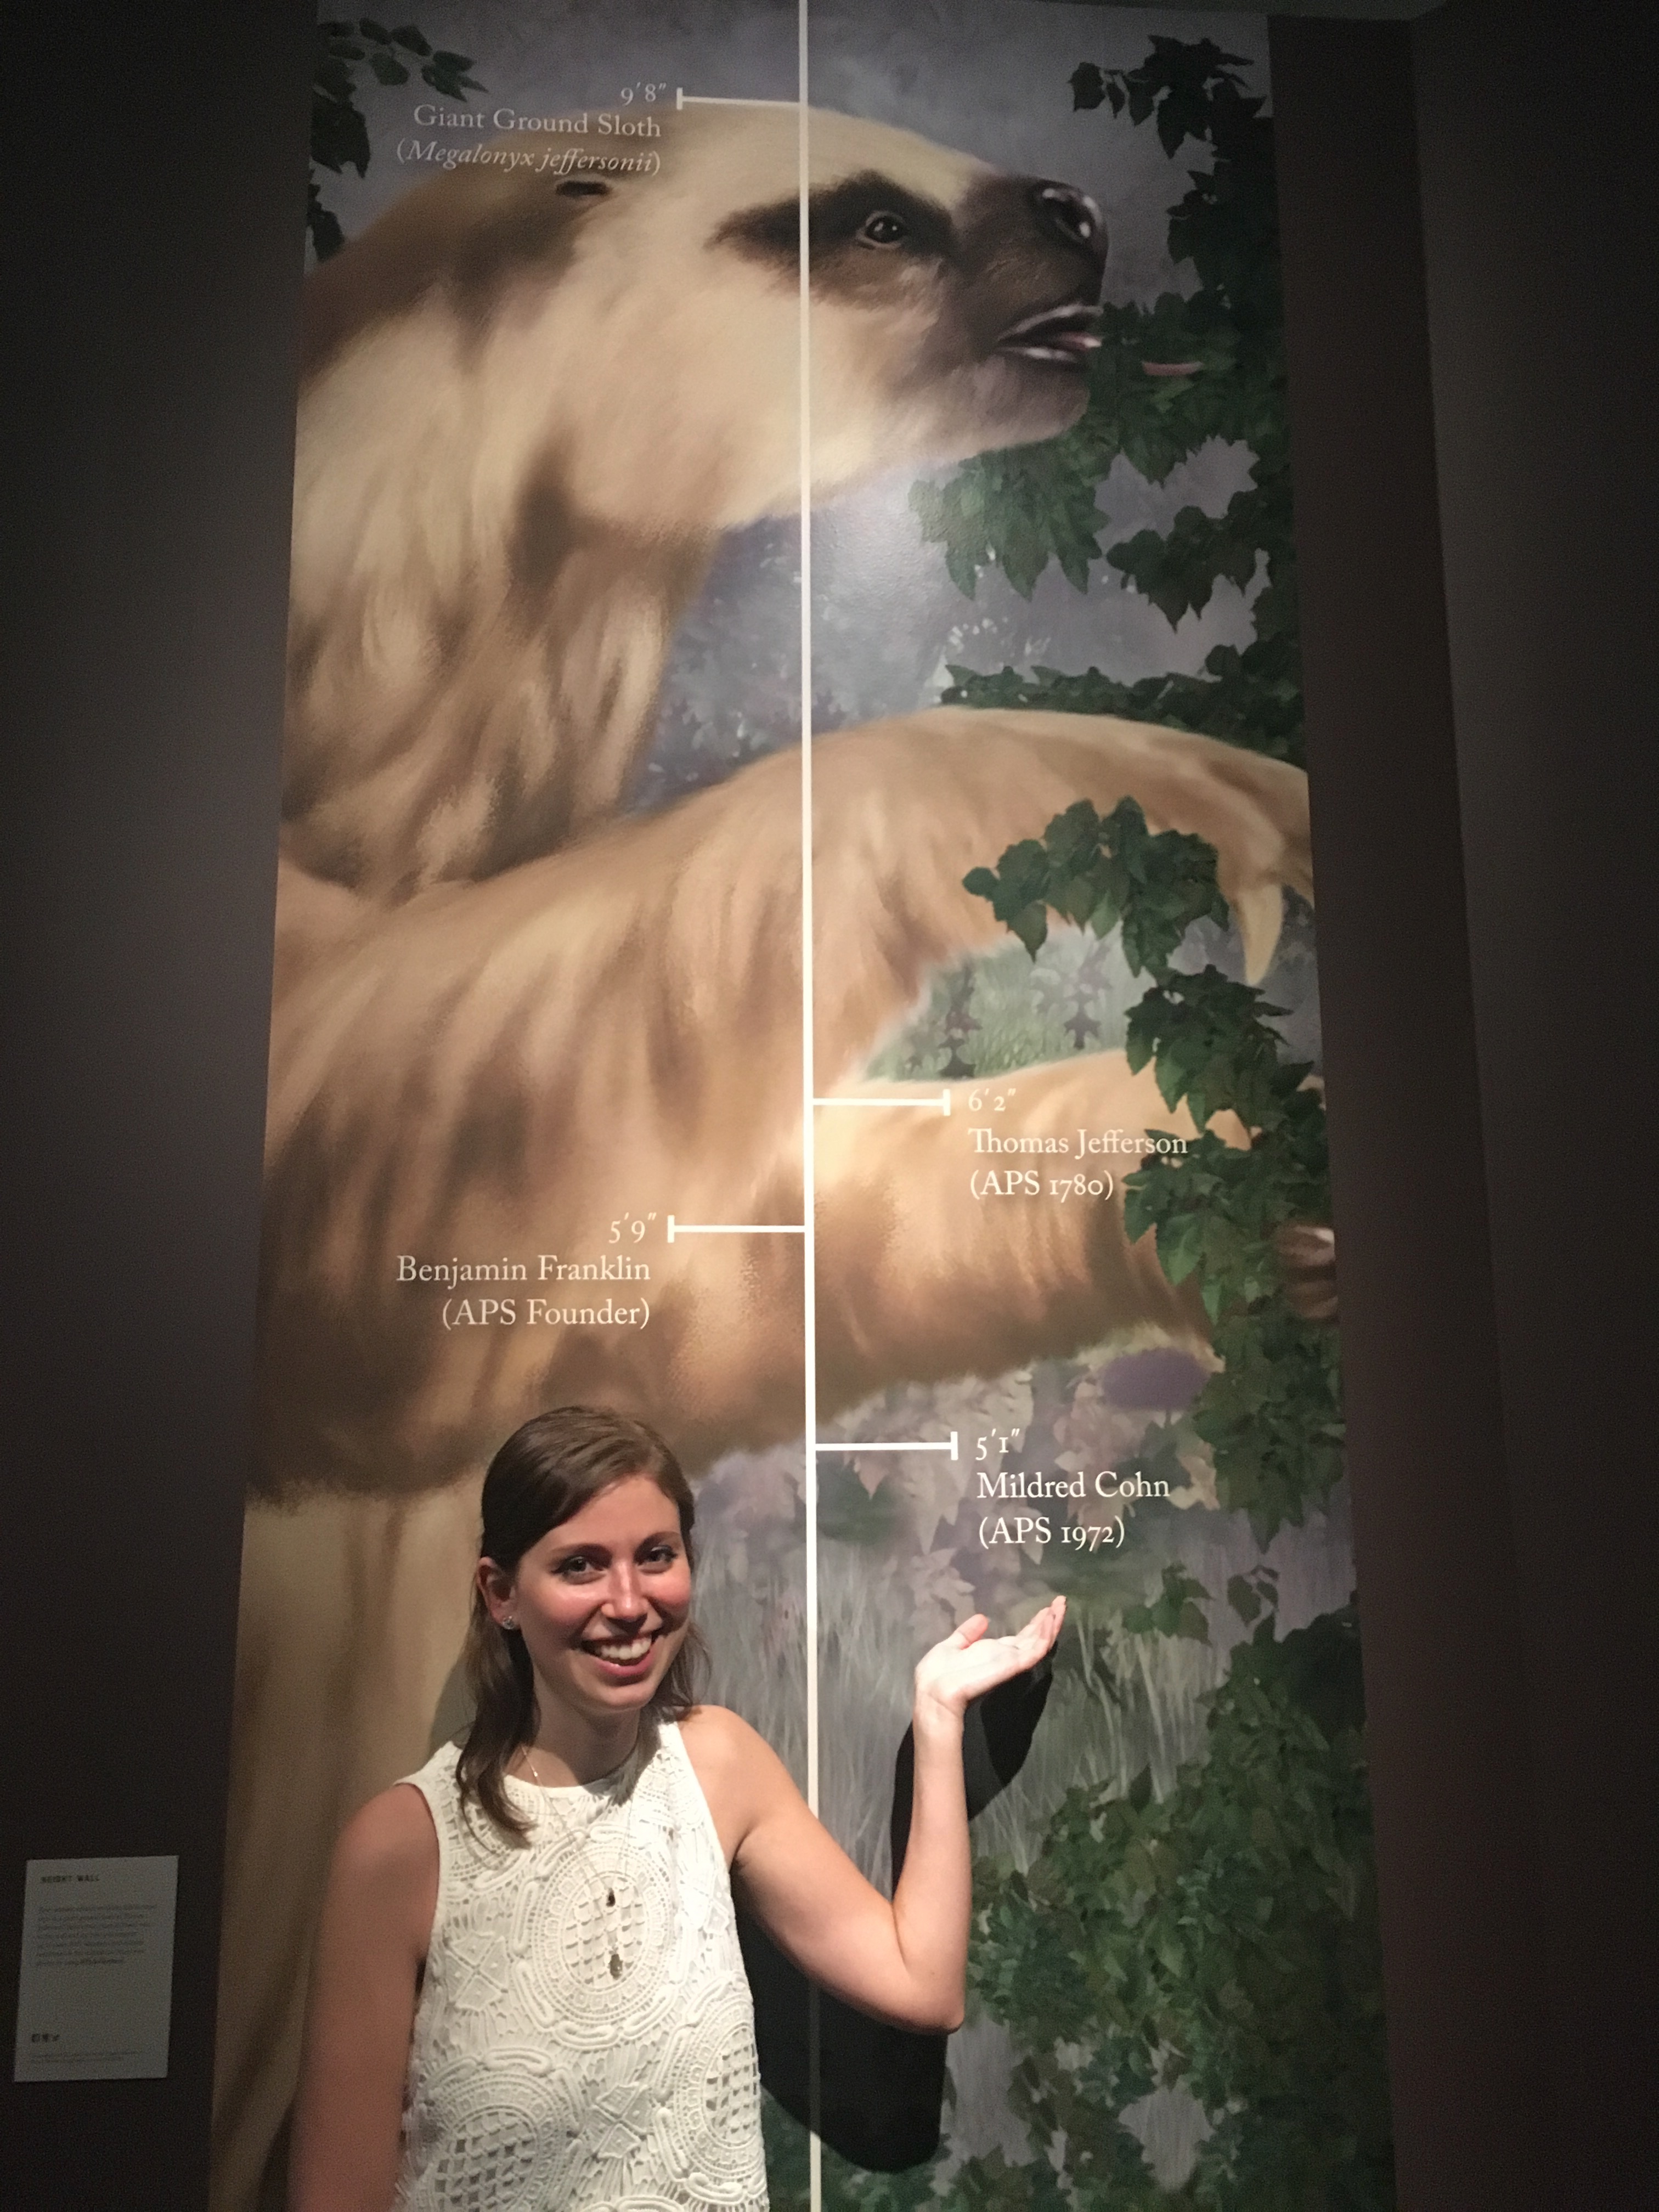 young woman standing in front of height chart with image of sloth